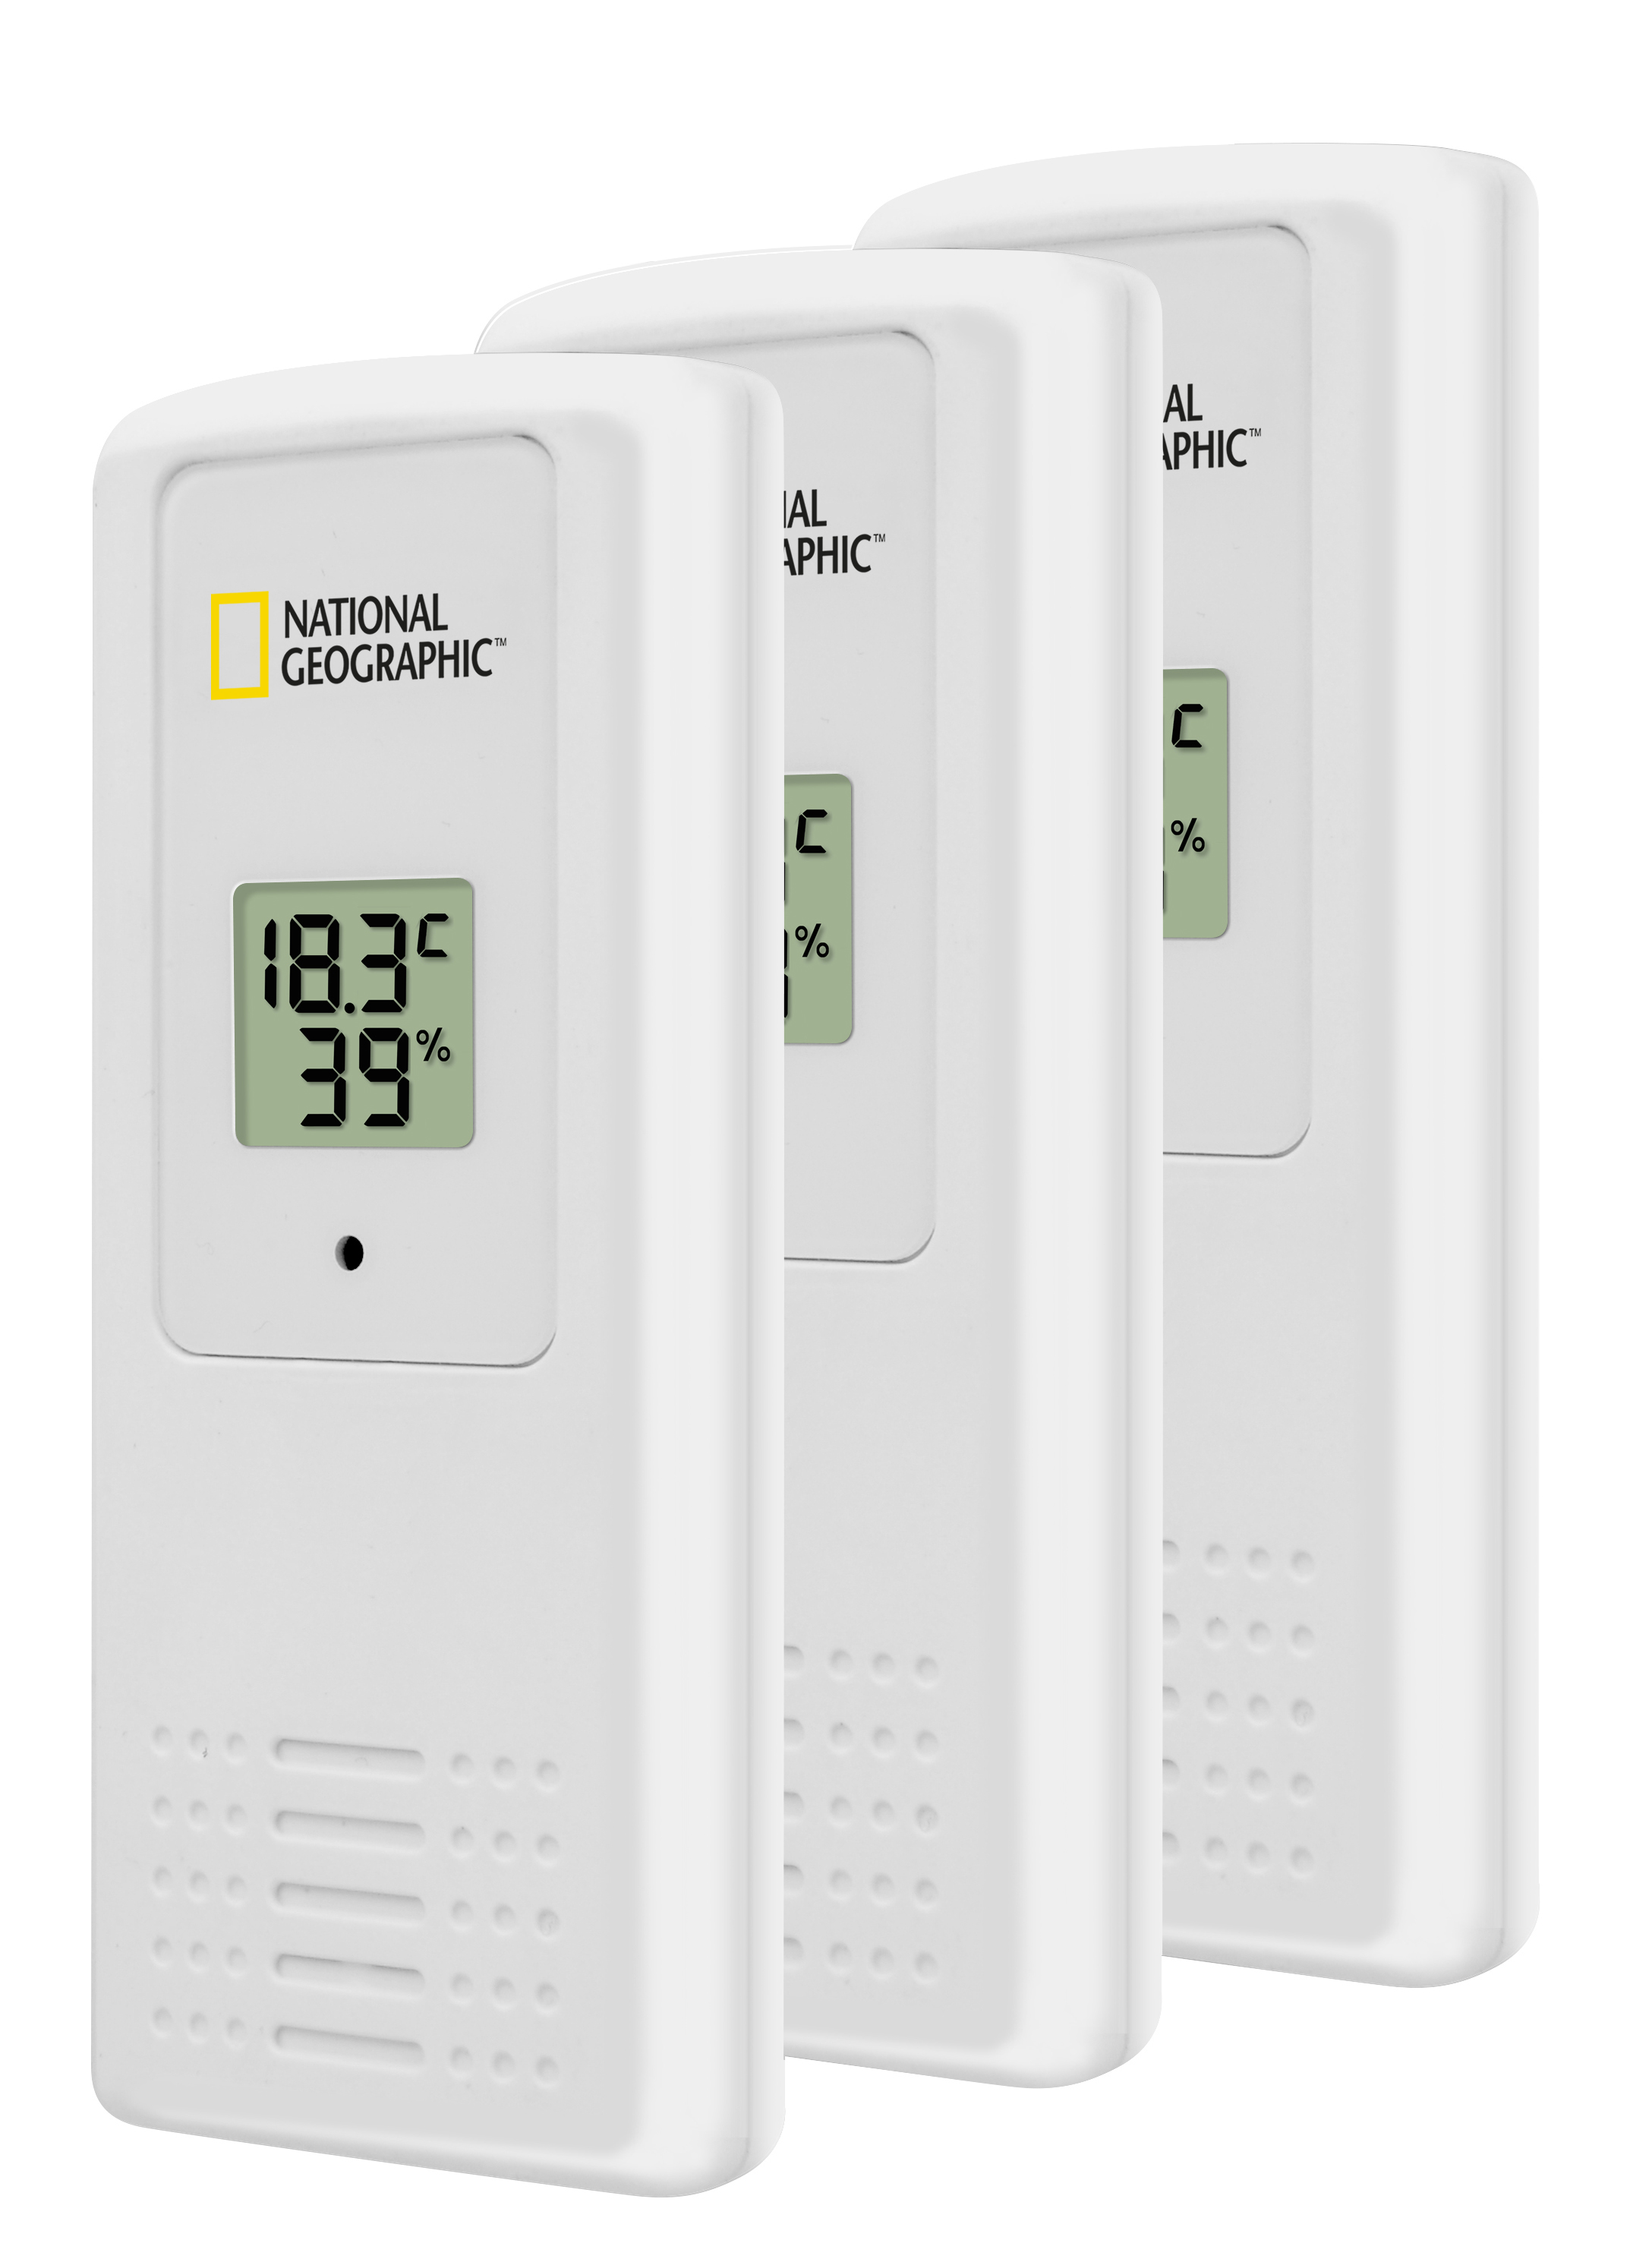 NATIONAL GEOGRAPHIC Thermo-hygrometer black 4 measurement results